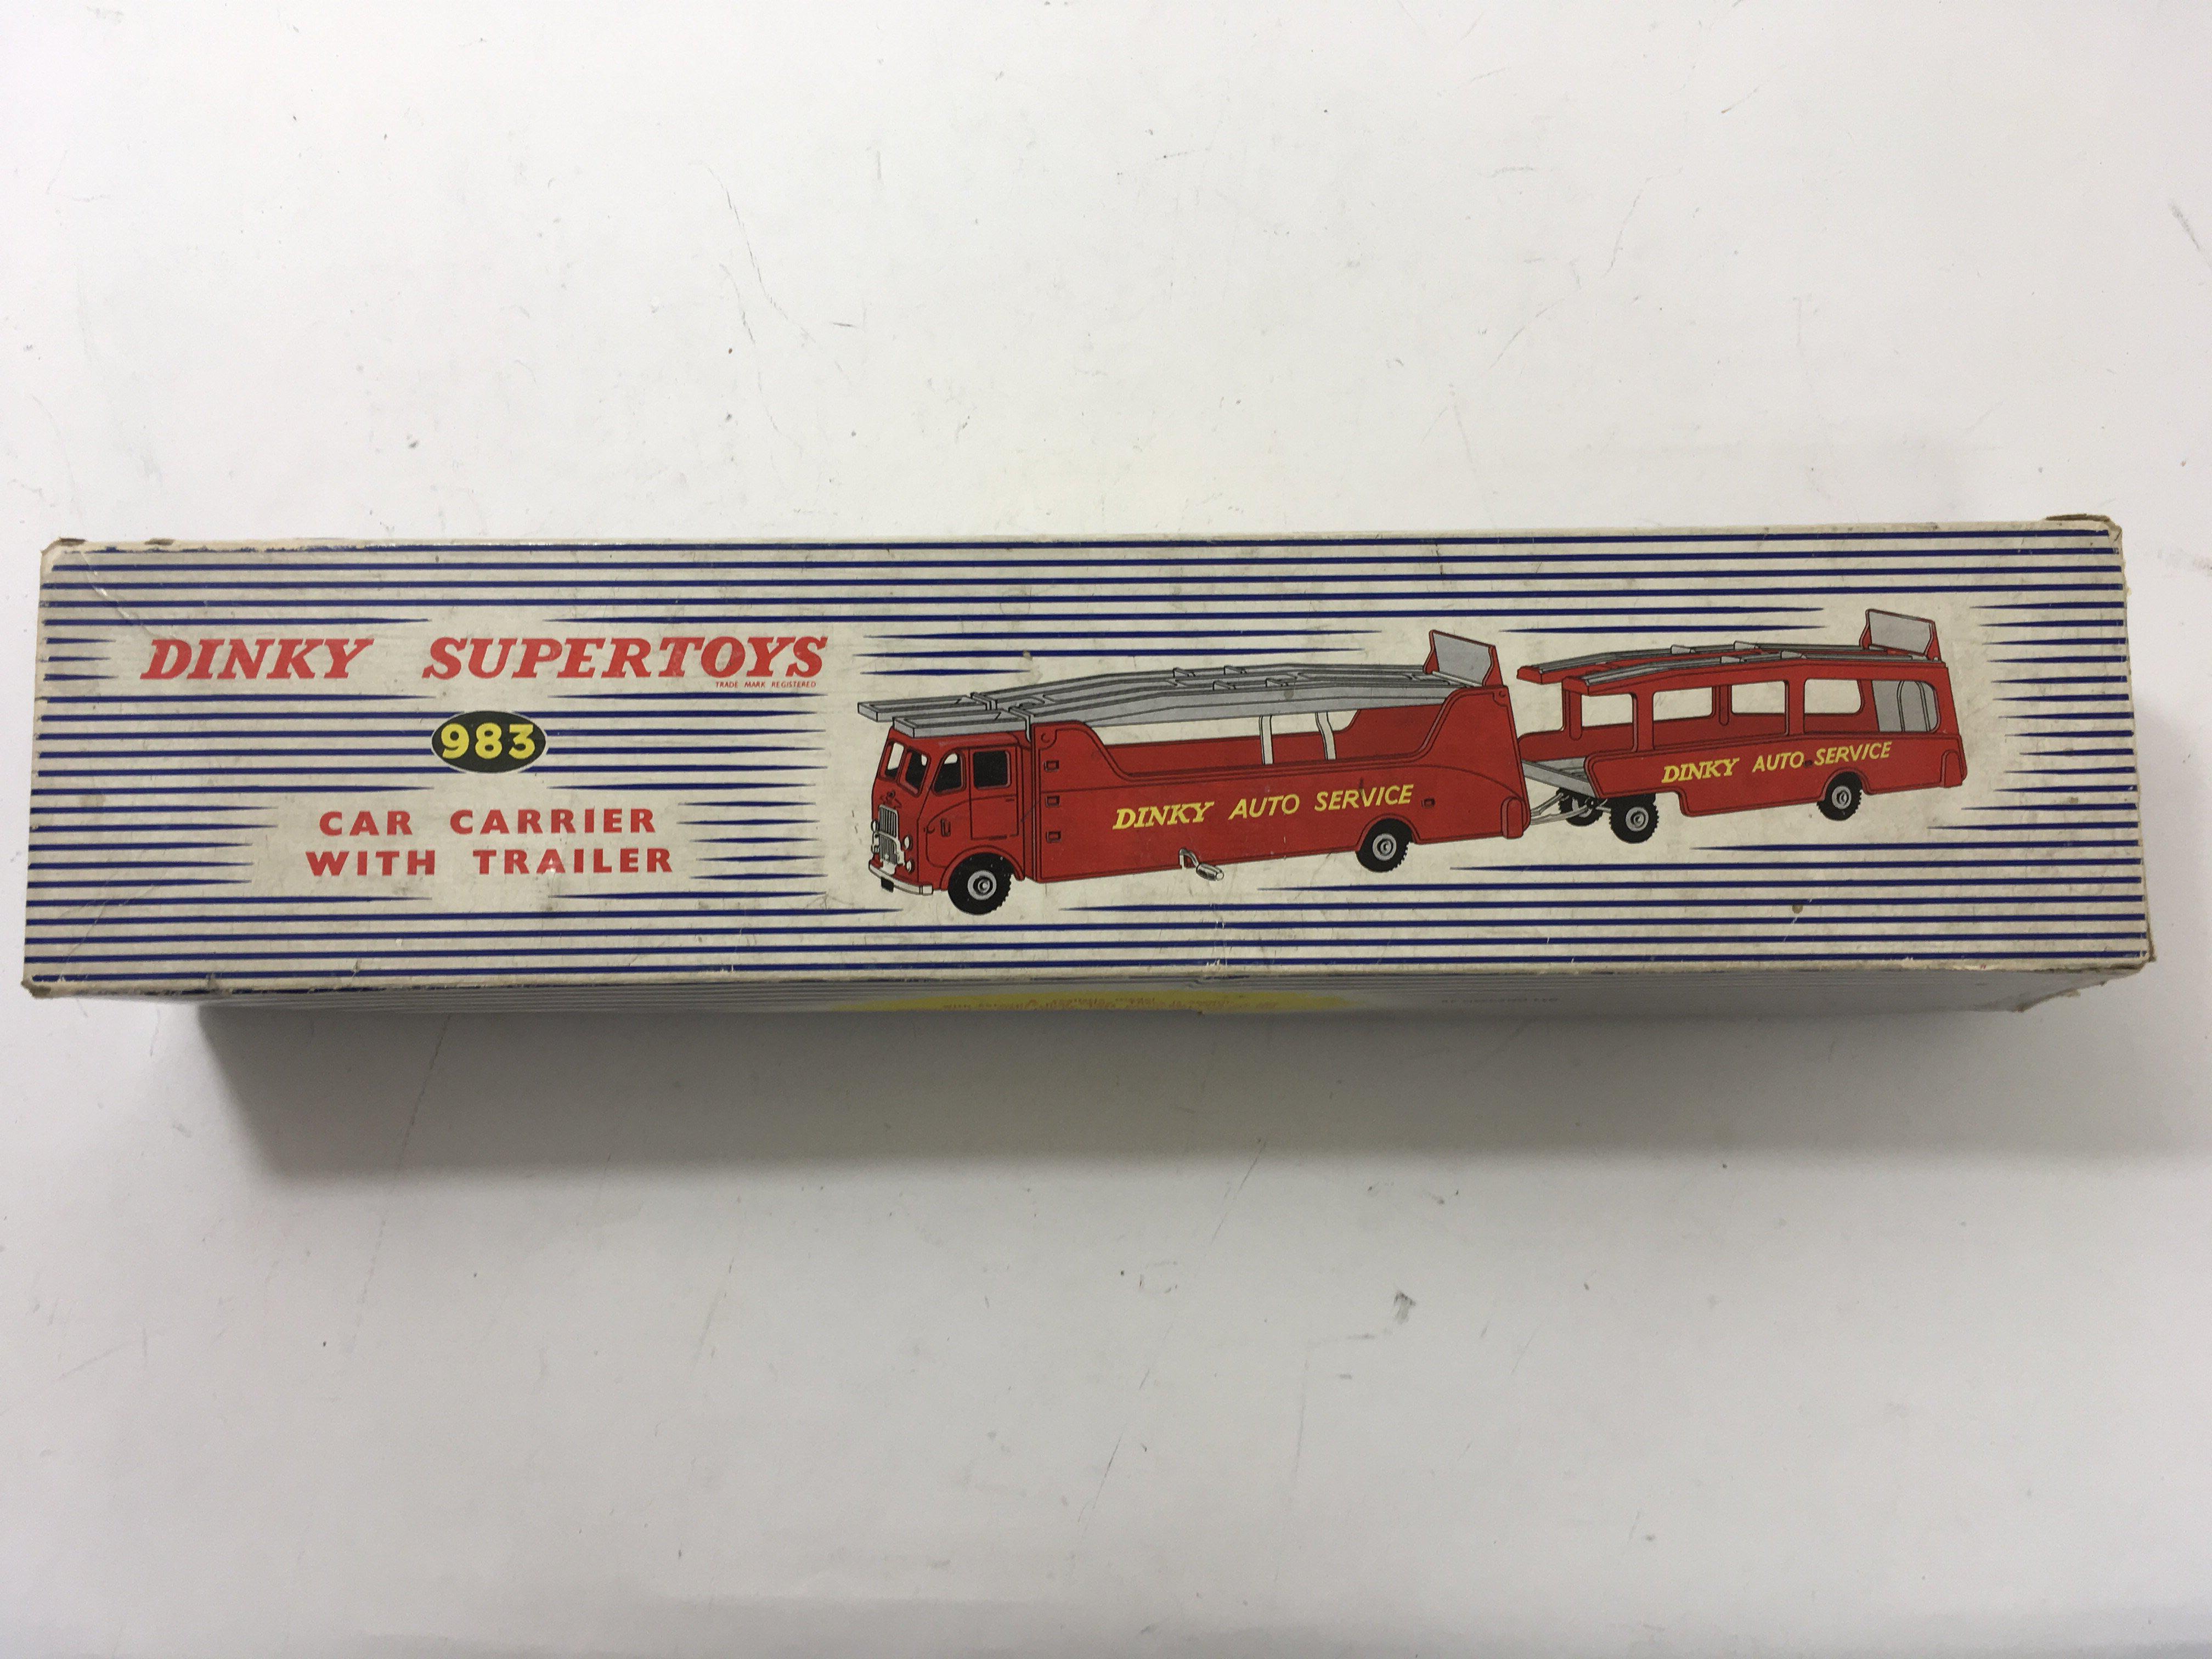 A Dinky Supertoys car carrier with trailer No 983.